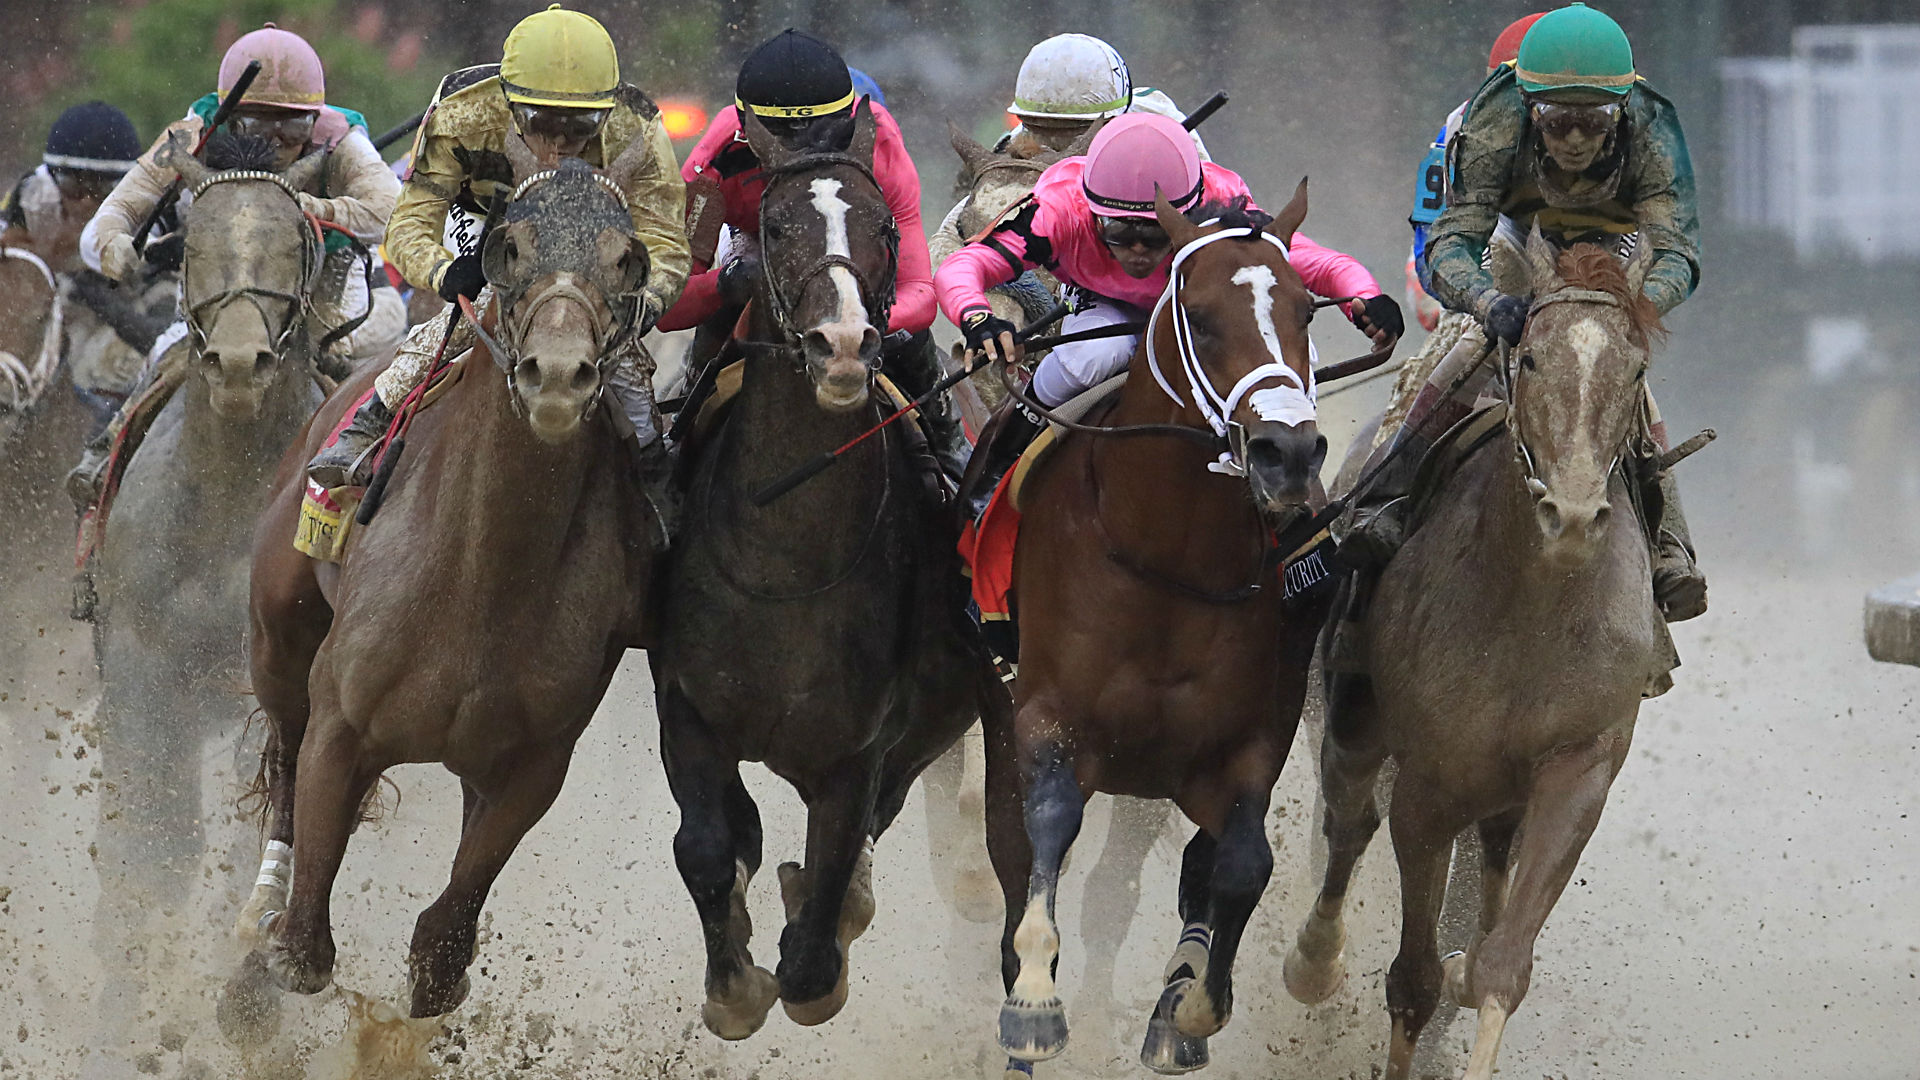 Kentucky Derby results: Who won the 2019 Kentucky Derby? Full order